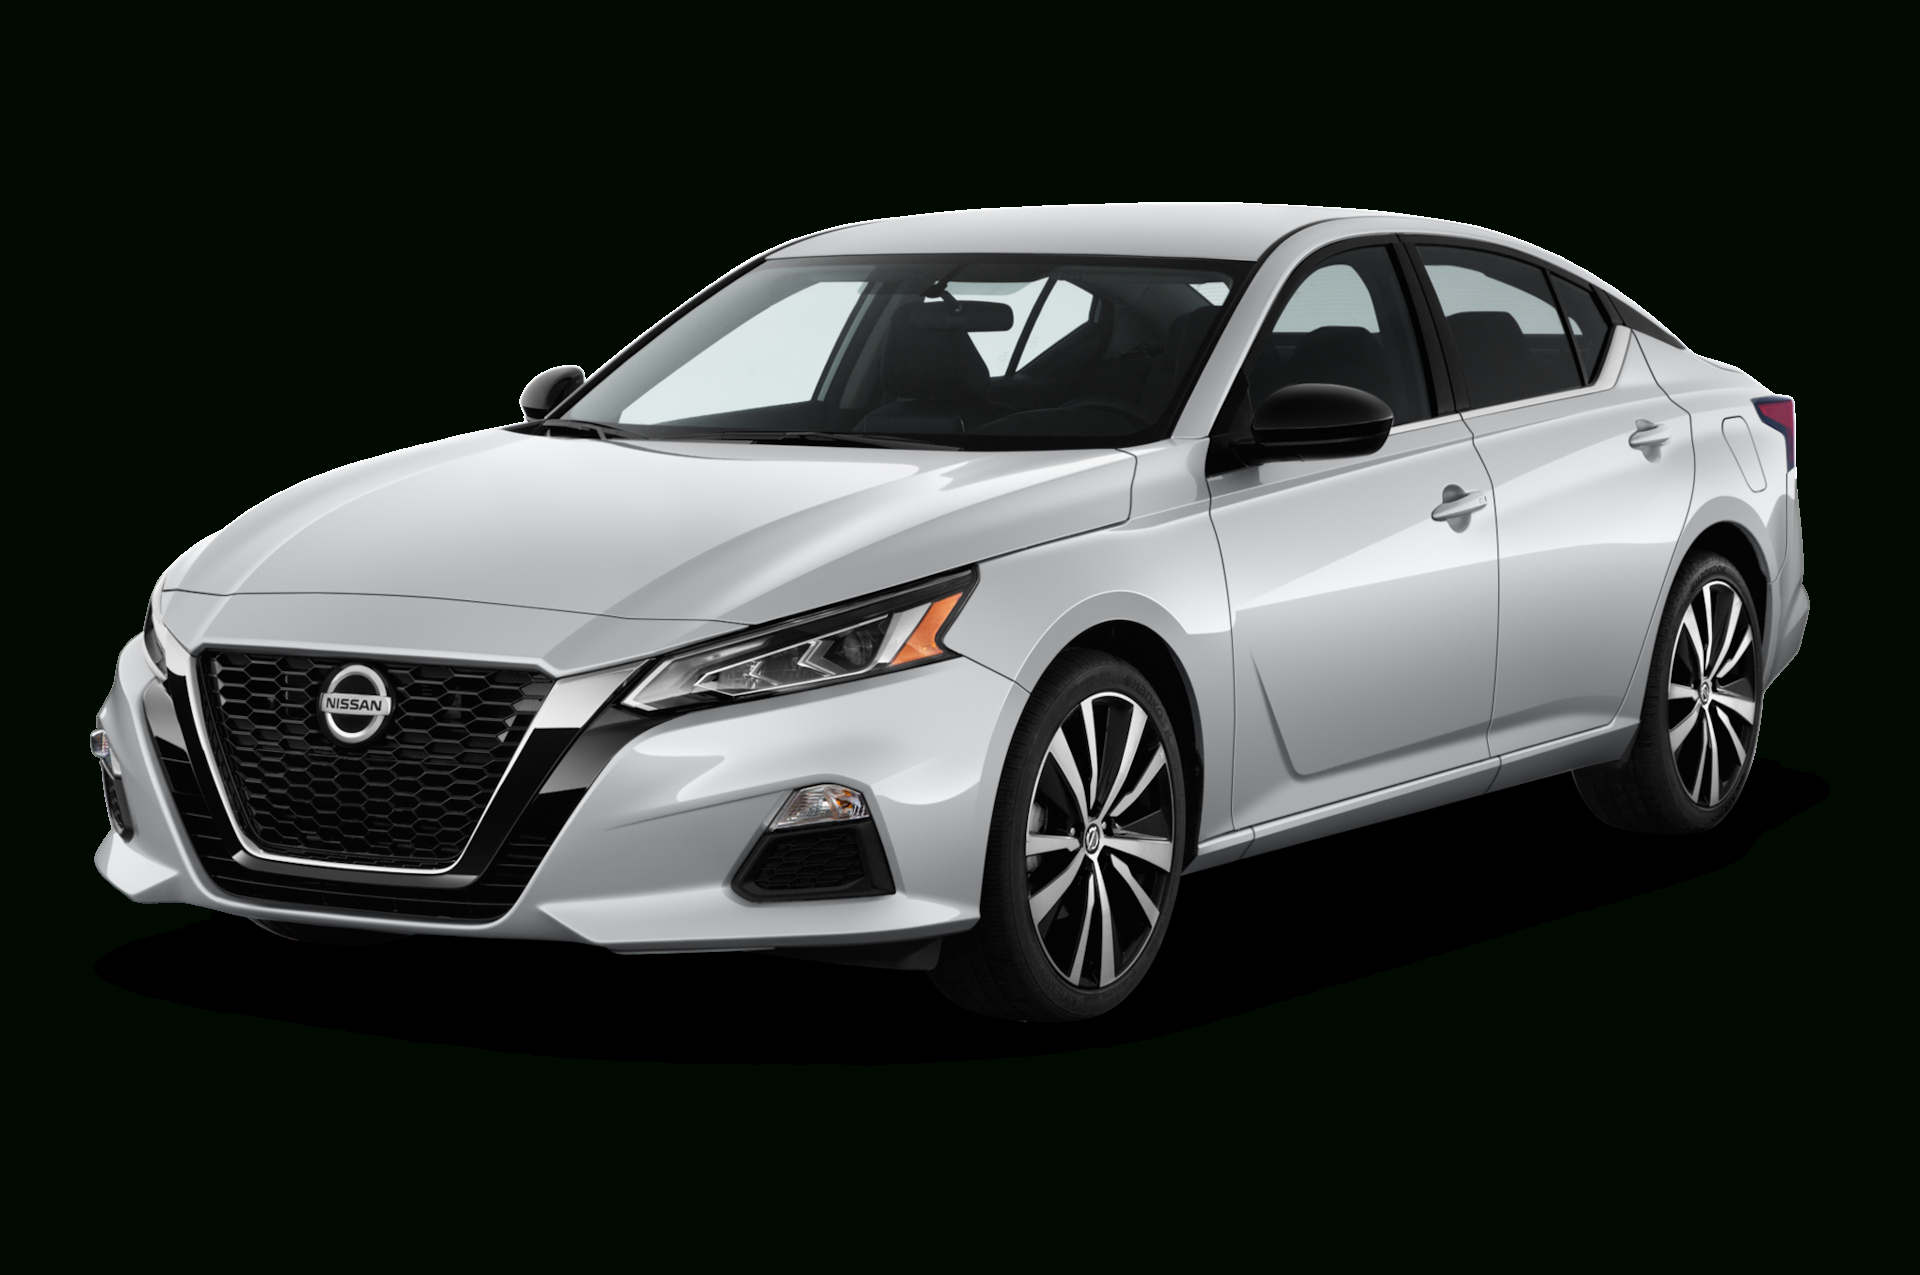 2020 Nissan Altima Prices, Reviews, And Photos - Motortrend pertaining to Nissan Altima 2020 Price